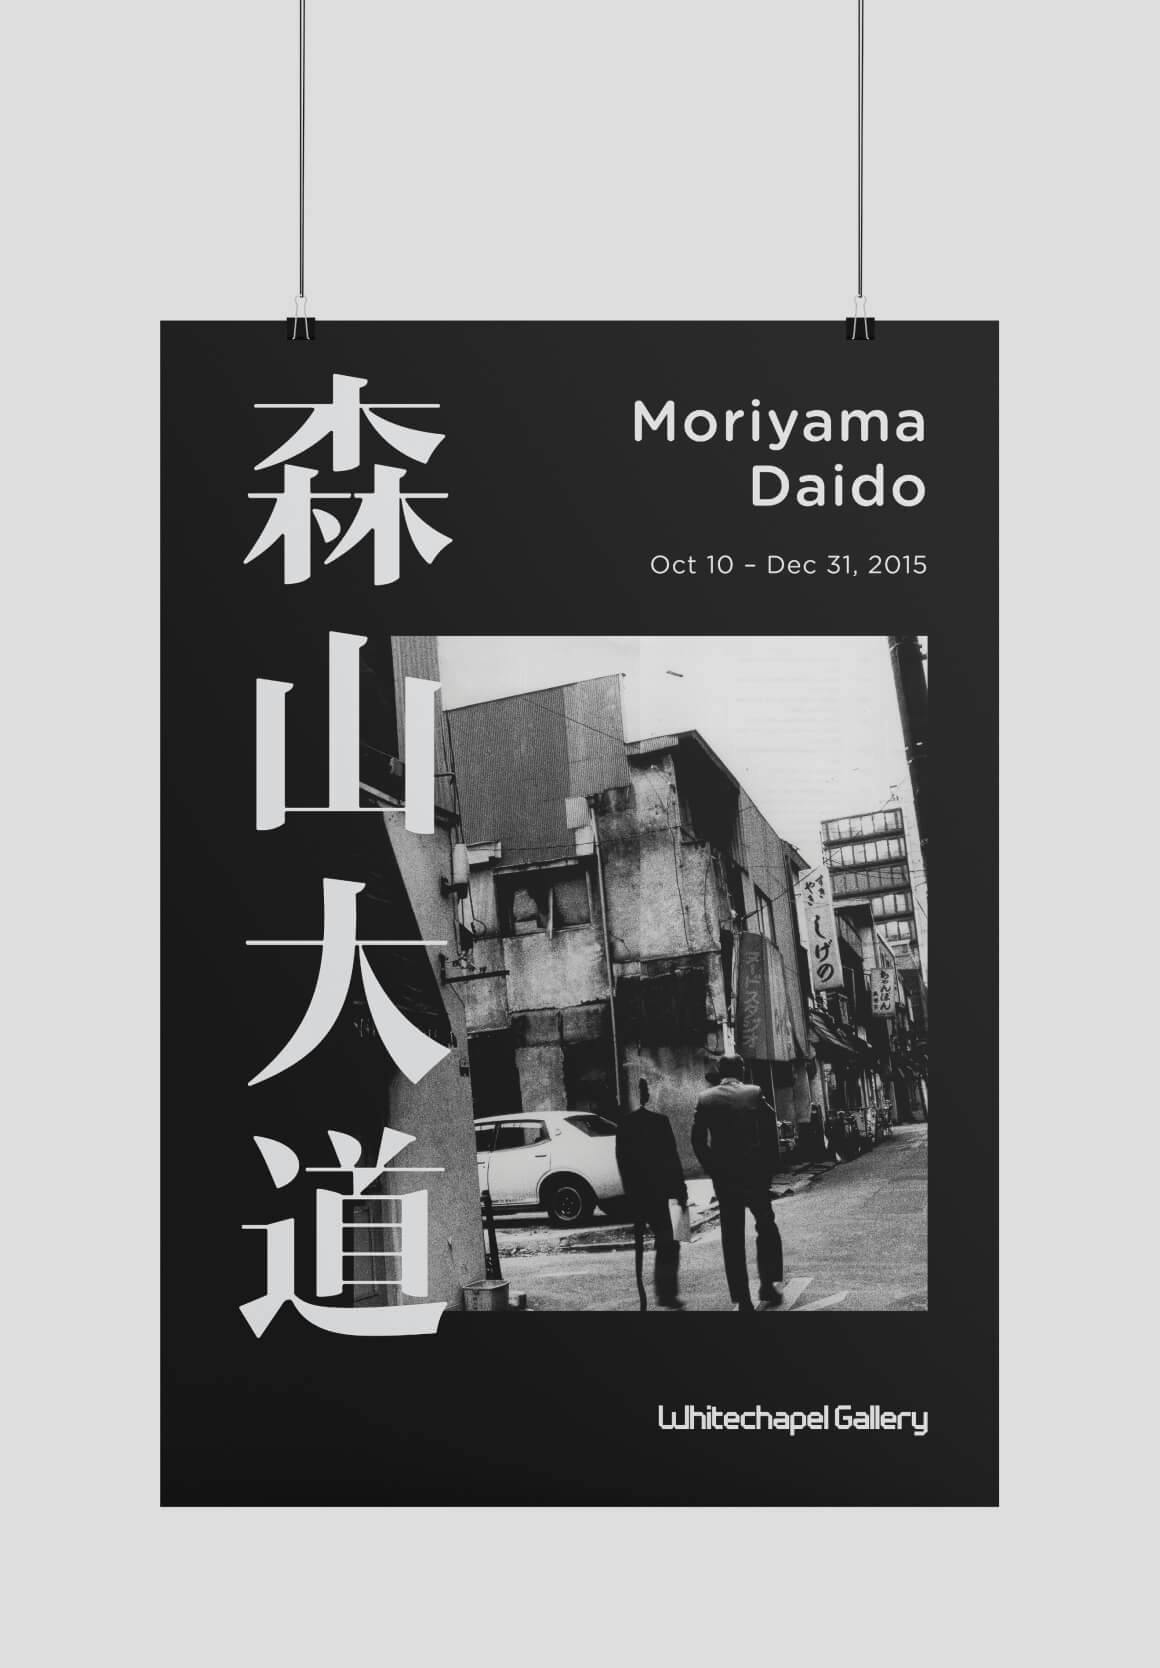 Mockup of a physical art poster. Featured photo in the black-and-white high contrast style of Moriyama Daidos signature photography.